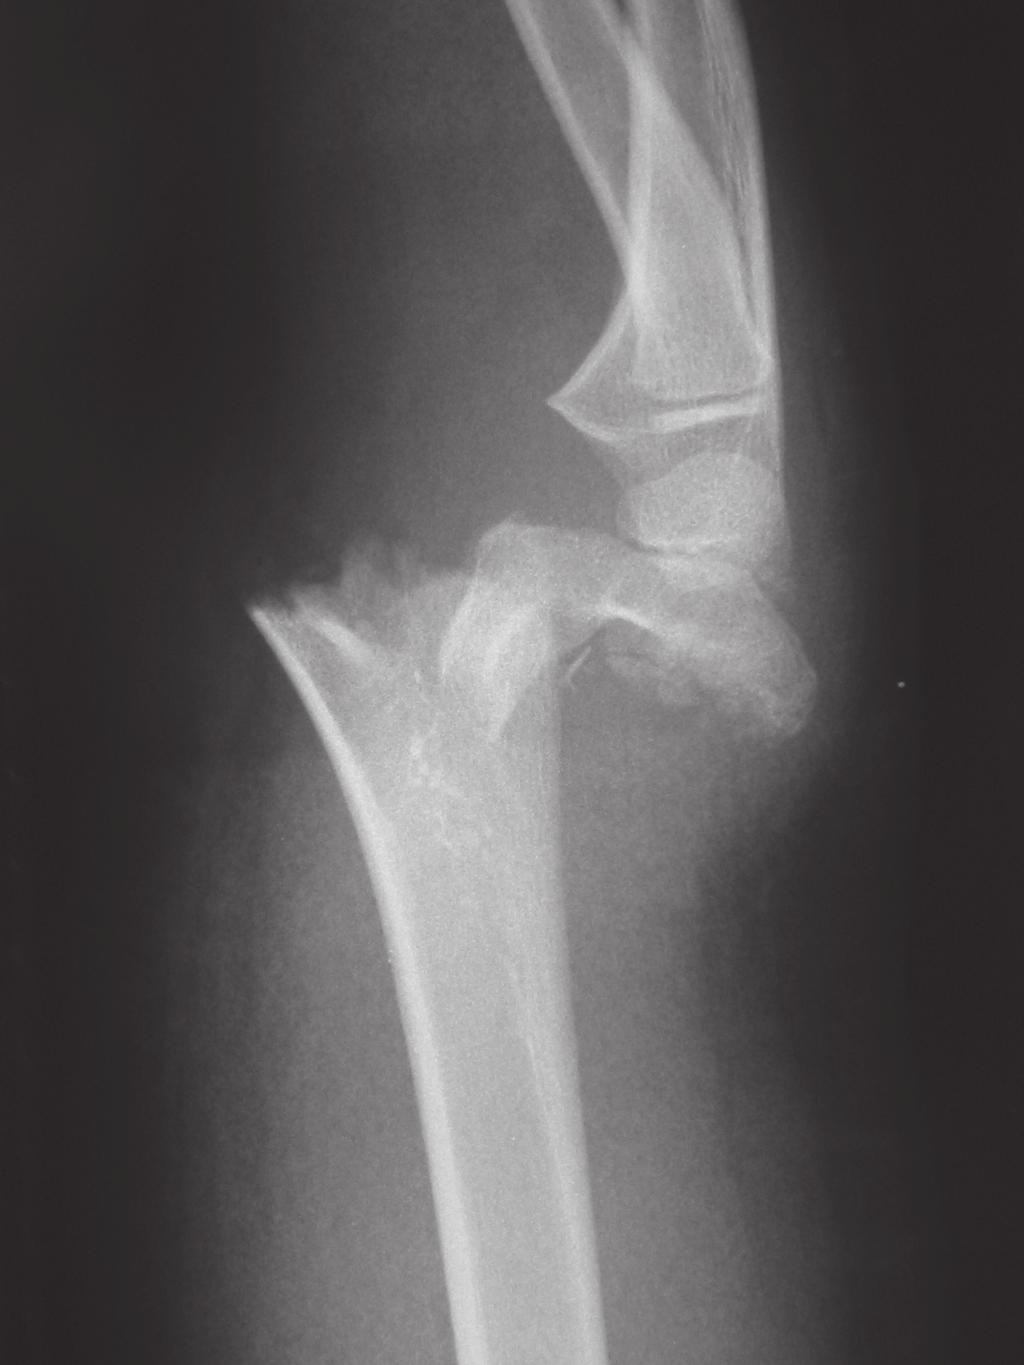 8.1 COMMON ORTHOPAEDIC PROBLEMS A Fig. 8.1.18 A Supracondylar fracture of the humerus may have a nerve injury. B Displaced fractures require reduction and K-wire fi xa t i o n.